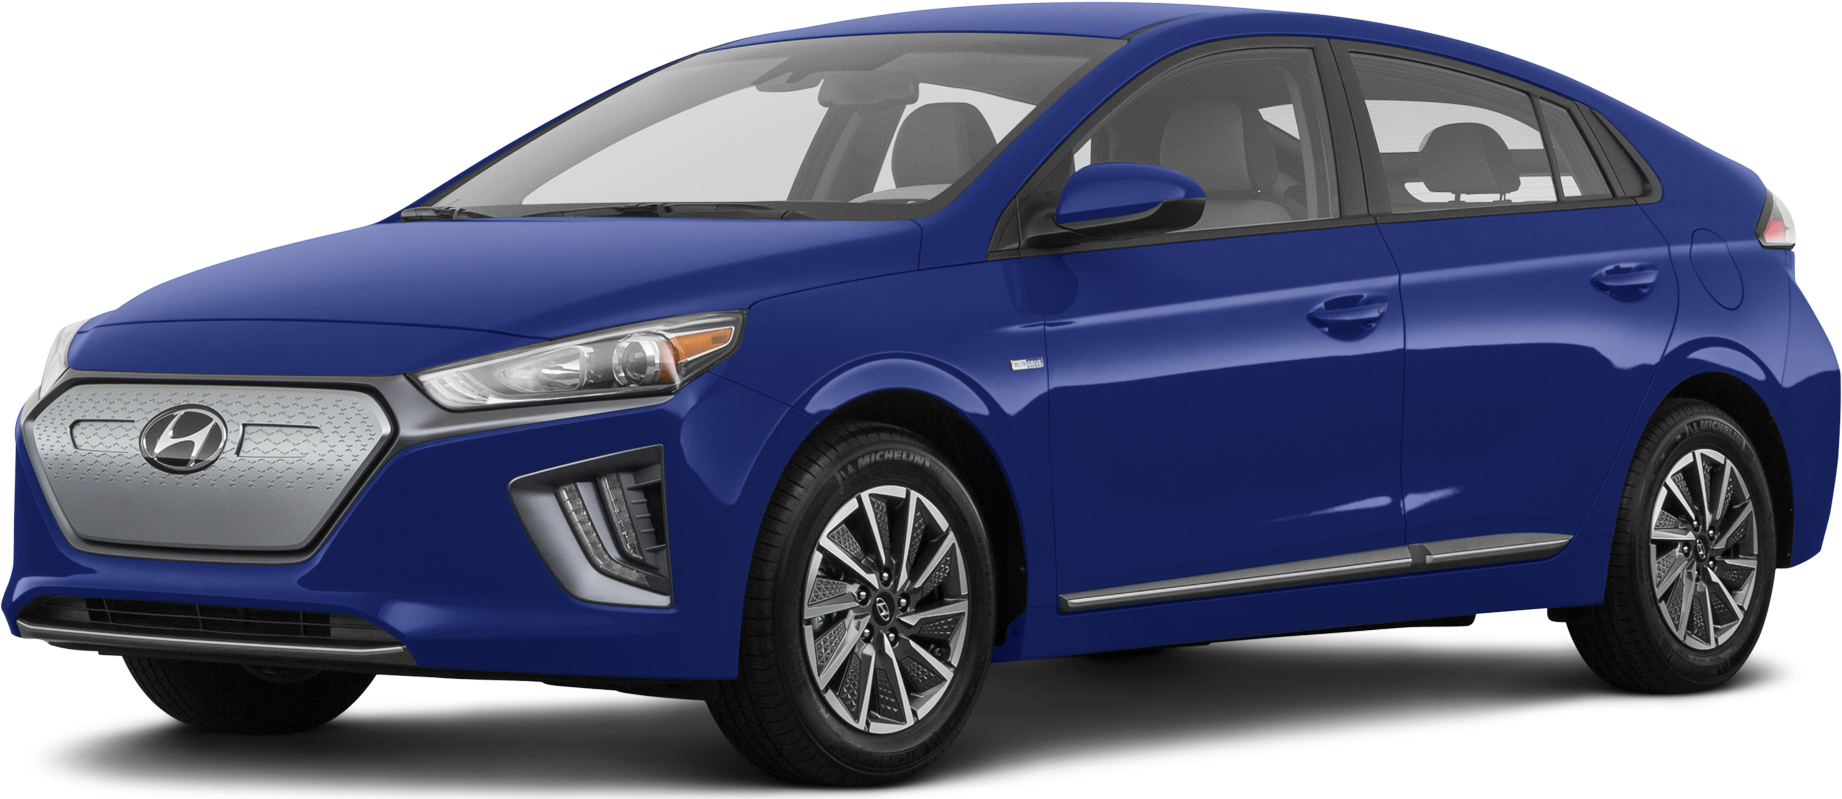 https://file.kelleybluebookimages.com/kbb/base/evox/CP/14375/2020-Hyundai-Ioniq%20Electric-front_14375_032_1842x799_YP5_cropped.png